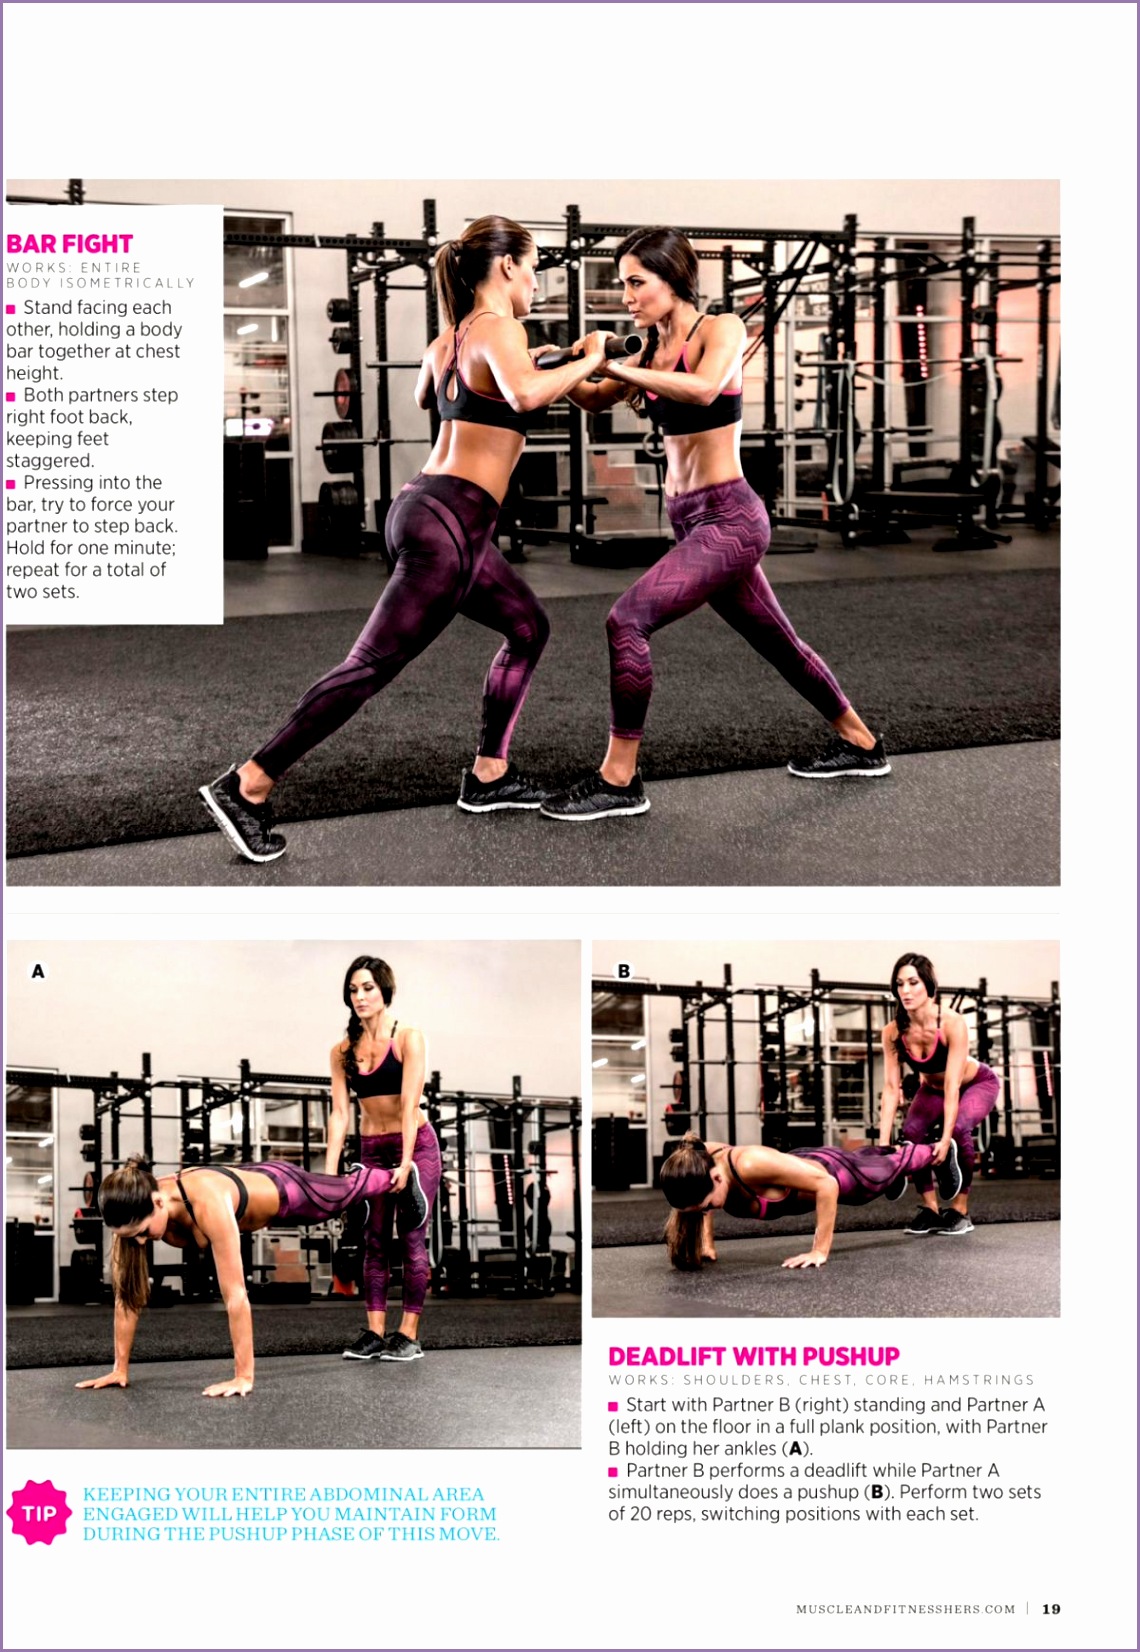 nikki and brie bella in muscle fitness hers magazine mayjune 2015 issue